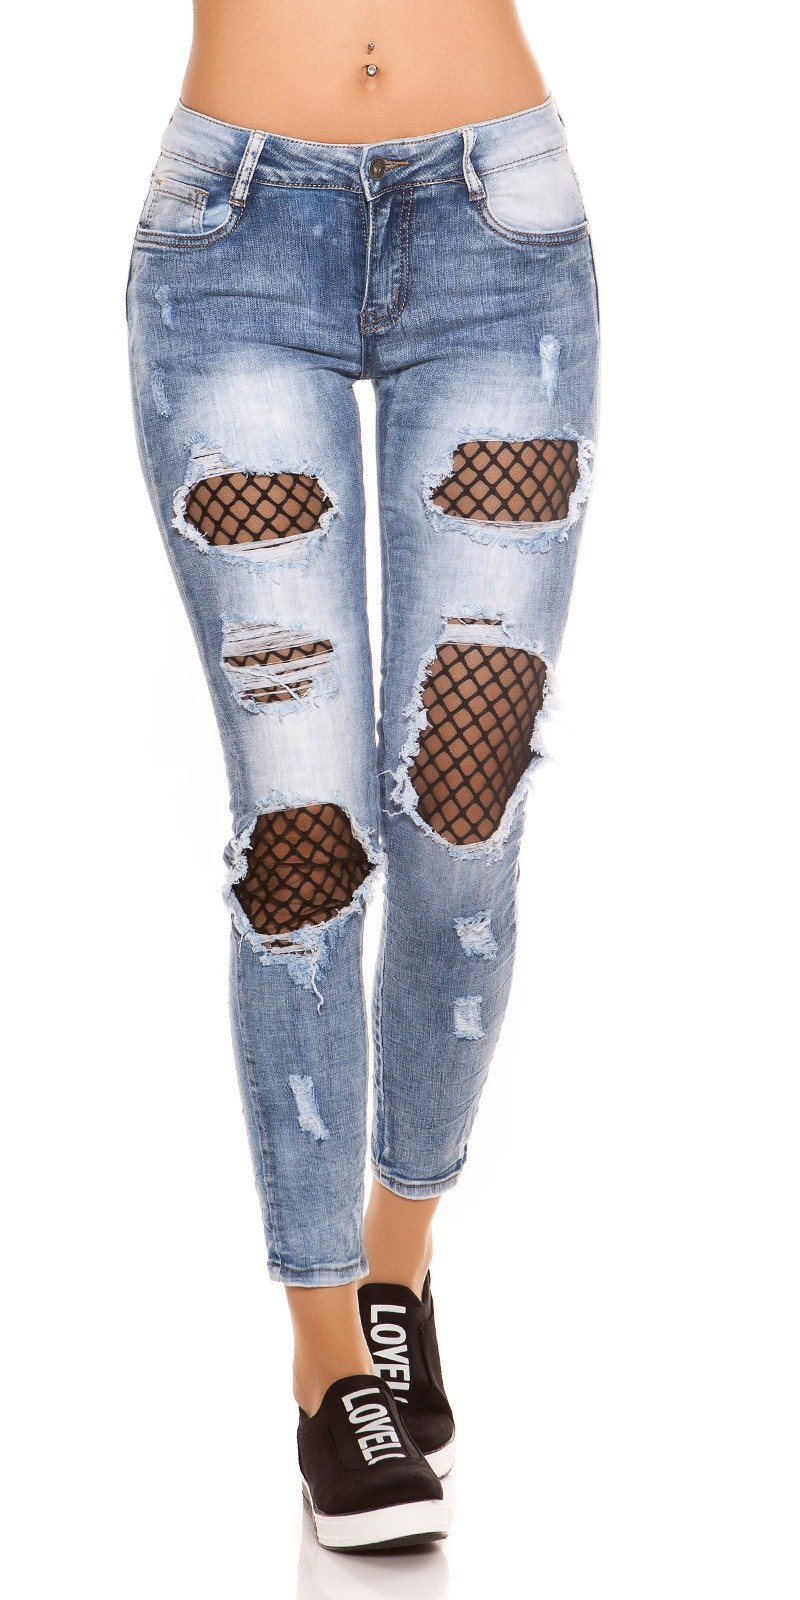 Jeans c/ rede 9